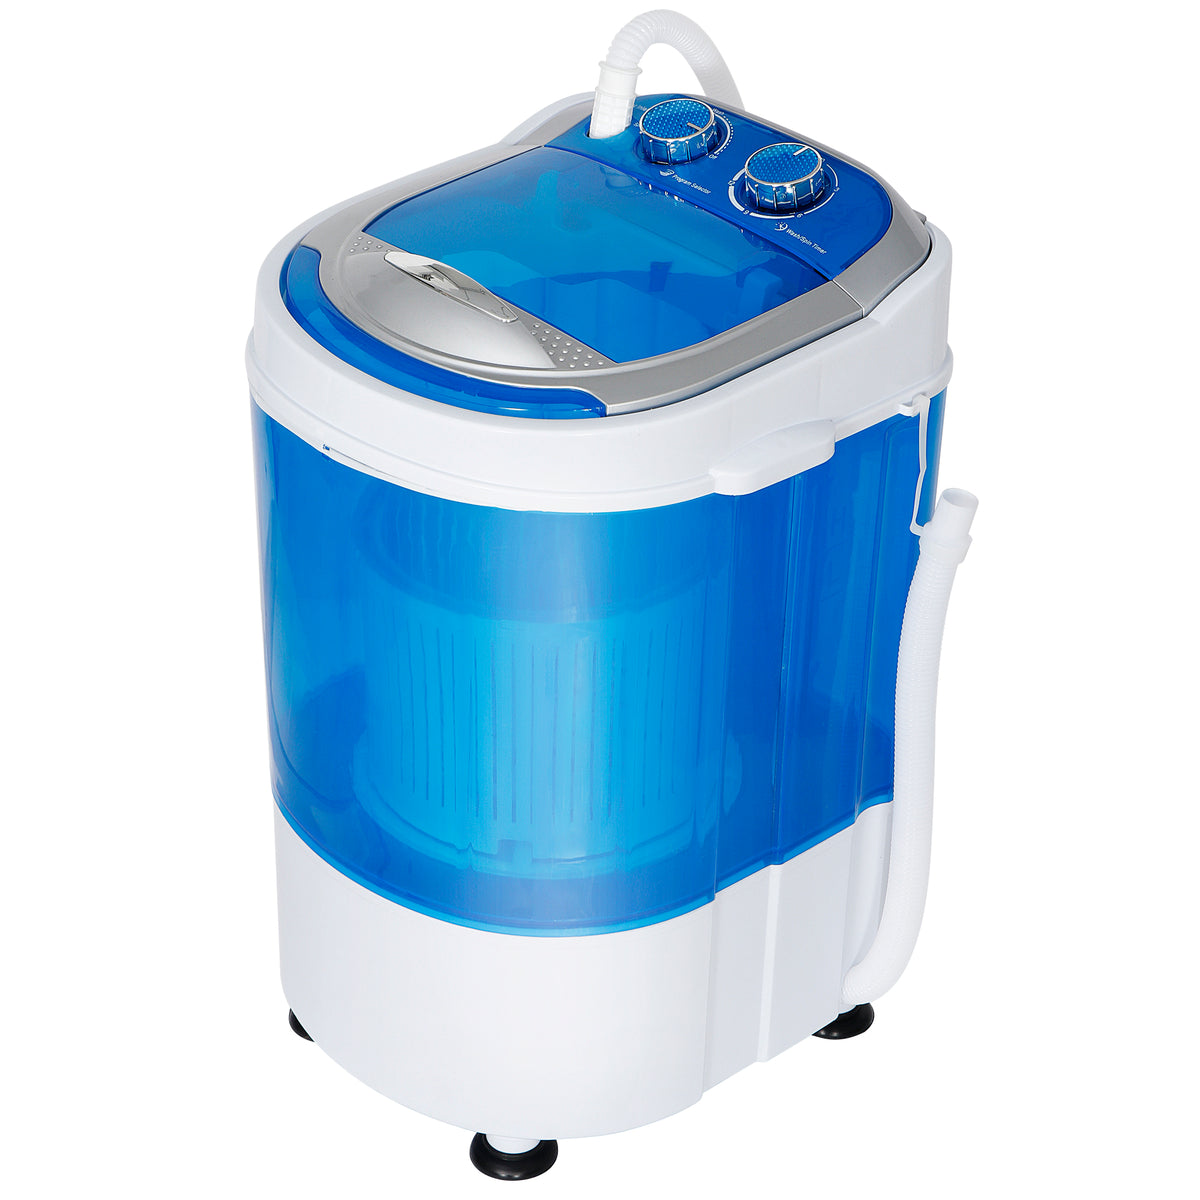 ZENY Portable Mini Washing Machine 5.7 lbs Washing Capacity Semi-Automatic  Compact Washer Spinner Small Cloth Washer Laundry Appliances for Apartment